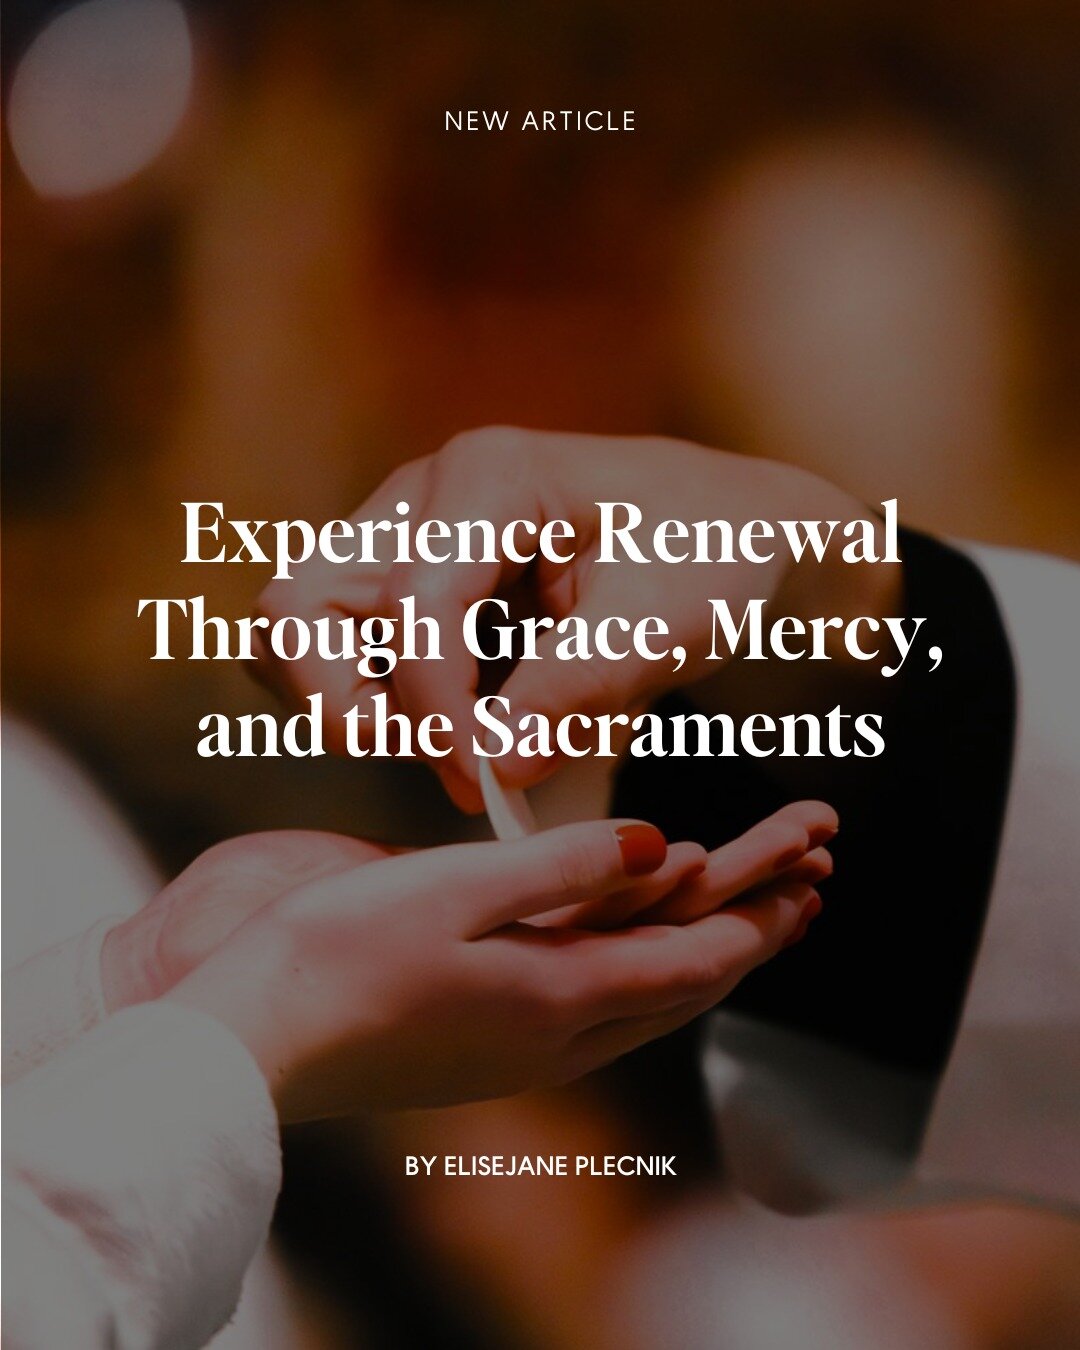 &ldquo;The grace God gives us is greater than all of our sin and temptation, and we&rsquo;re equipped with all the tools we need to grow in grace each day. These graces are guaranteed when we entrust ourselves to God&rsquo;s will and regularly partak